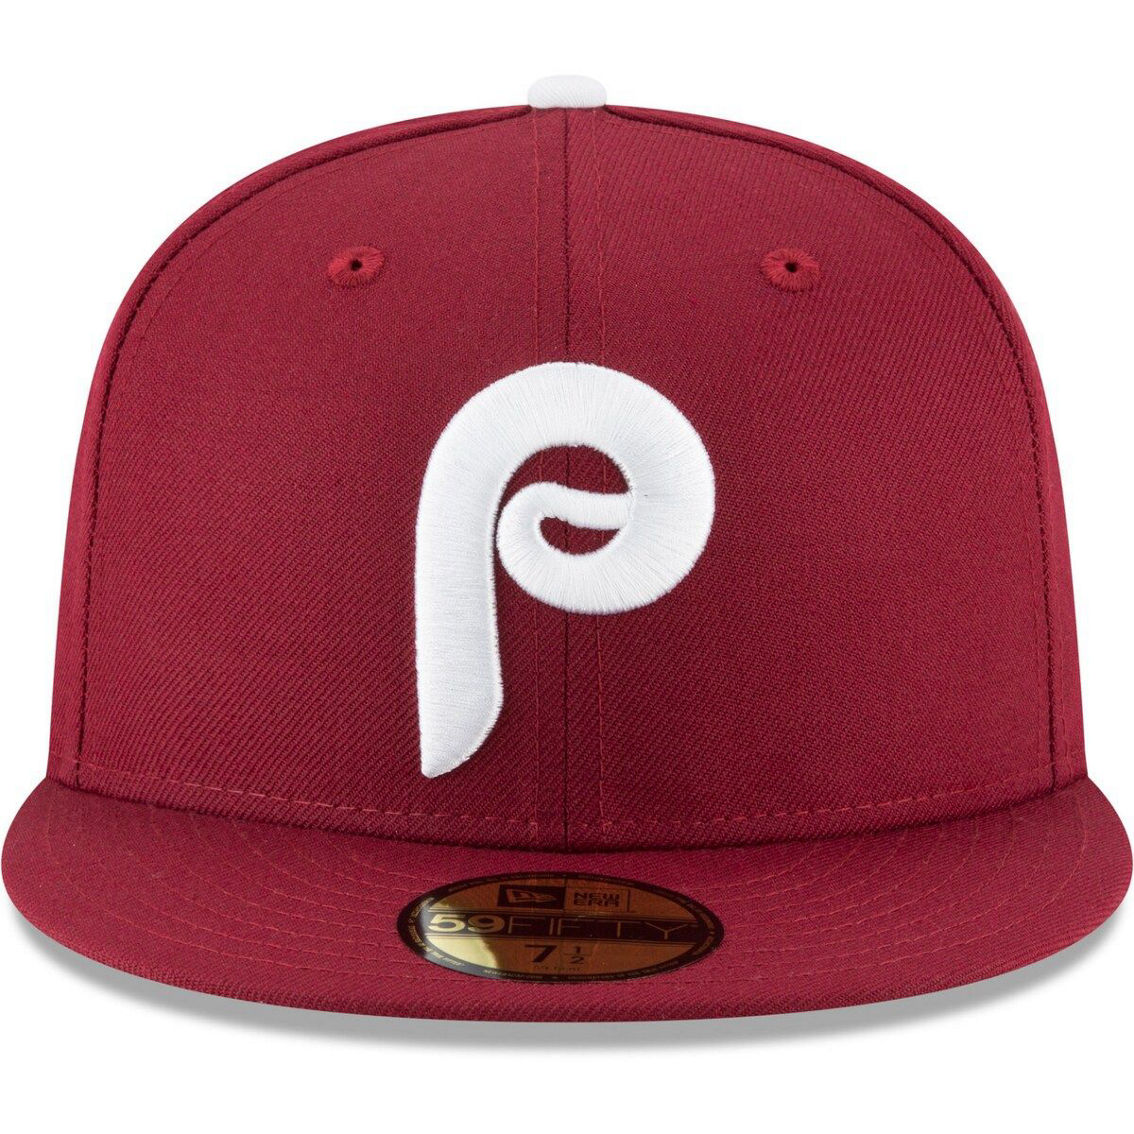 New Era Men's Maroon Philadelphia Phillies Cooperstown Collection Wool 59FIFTY Fitted Hat - Image 3 of 4